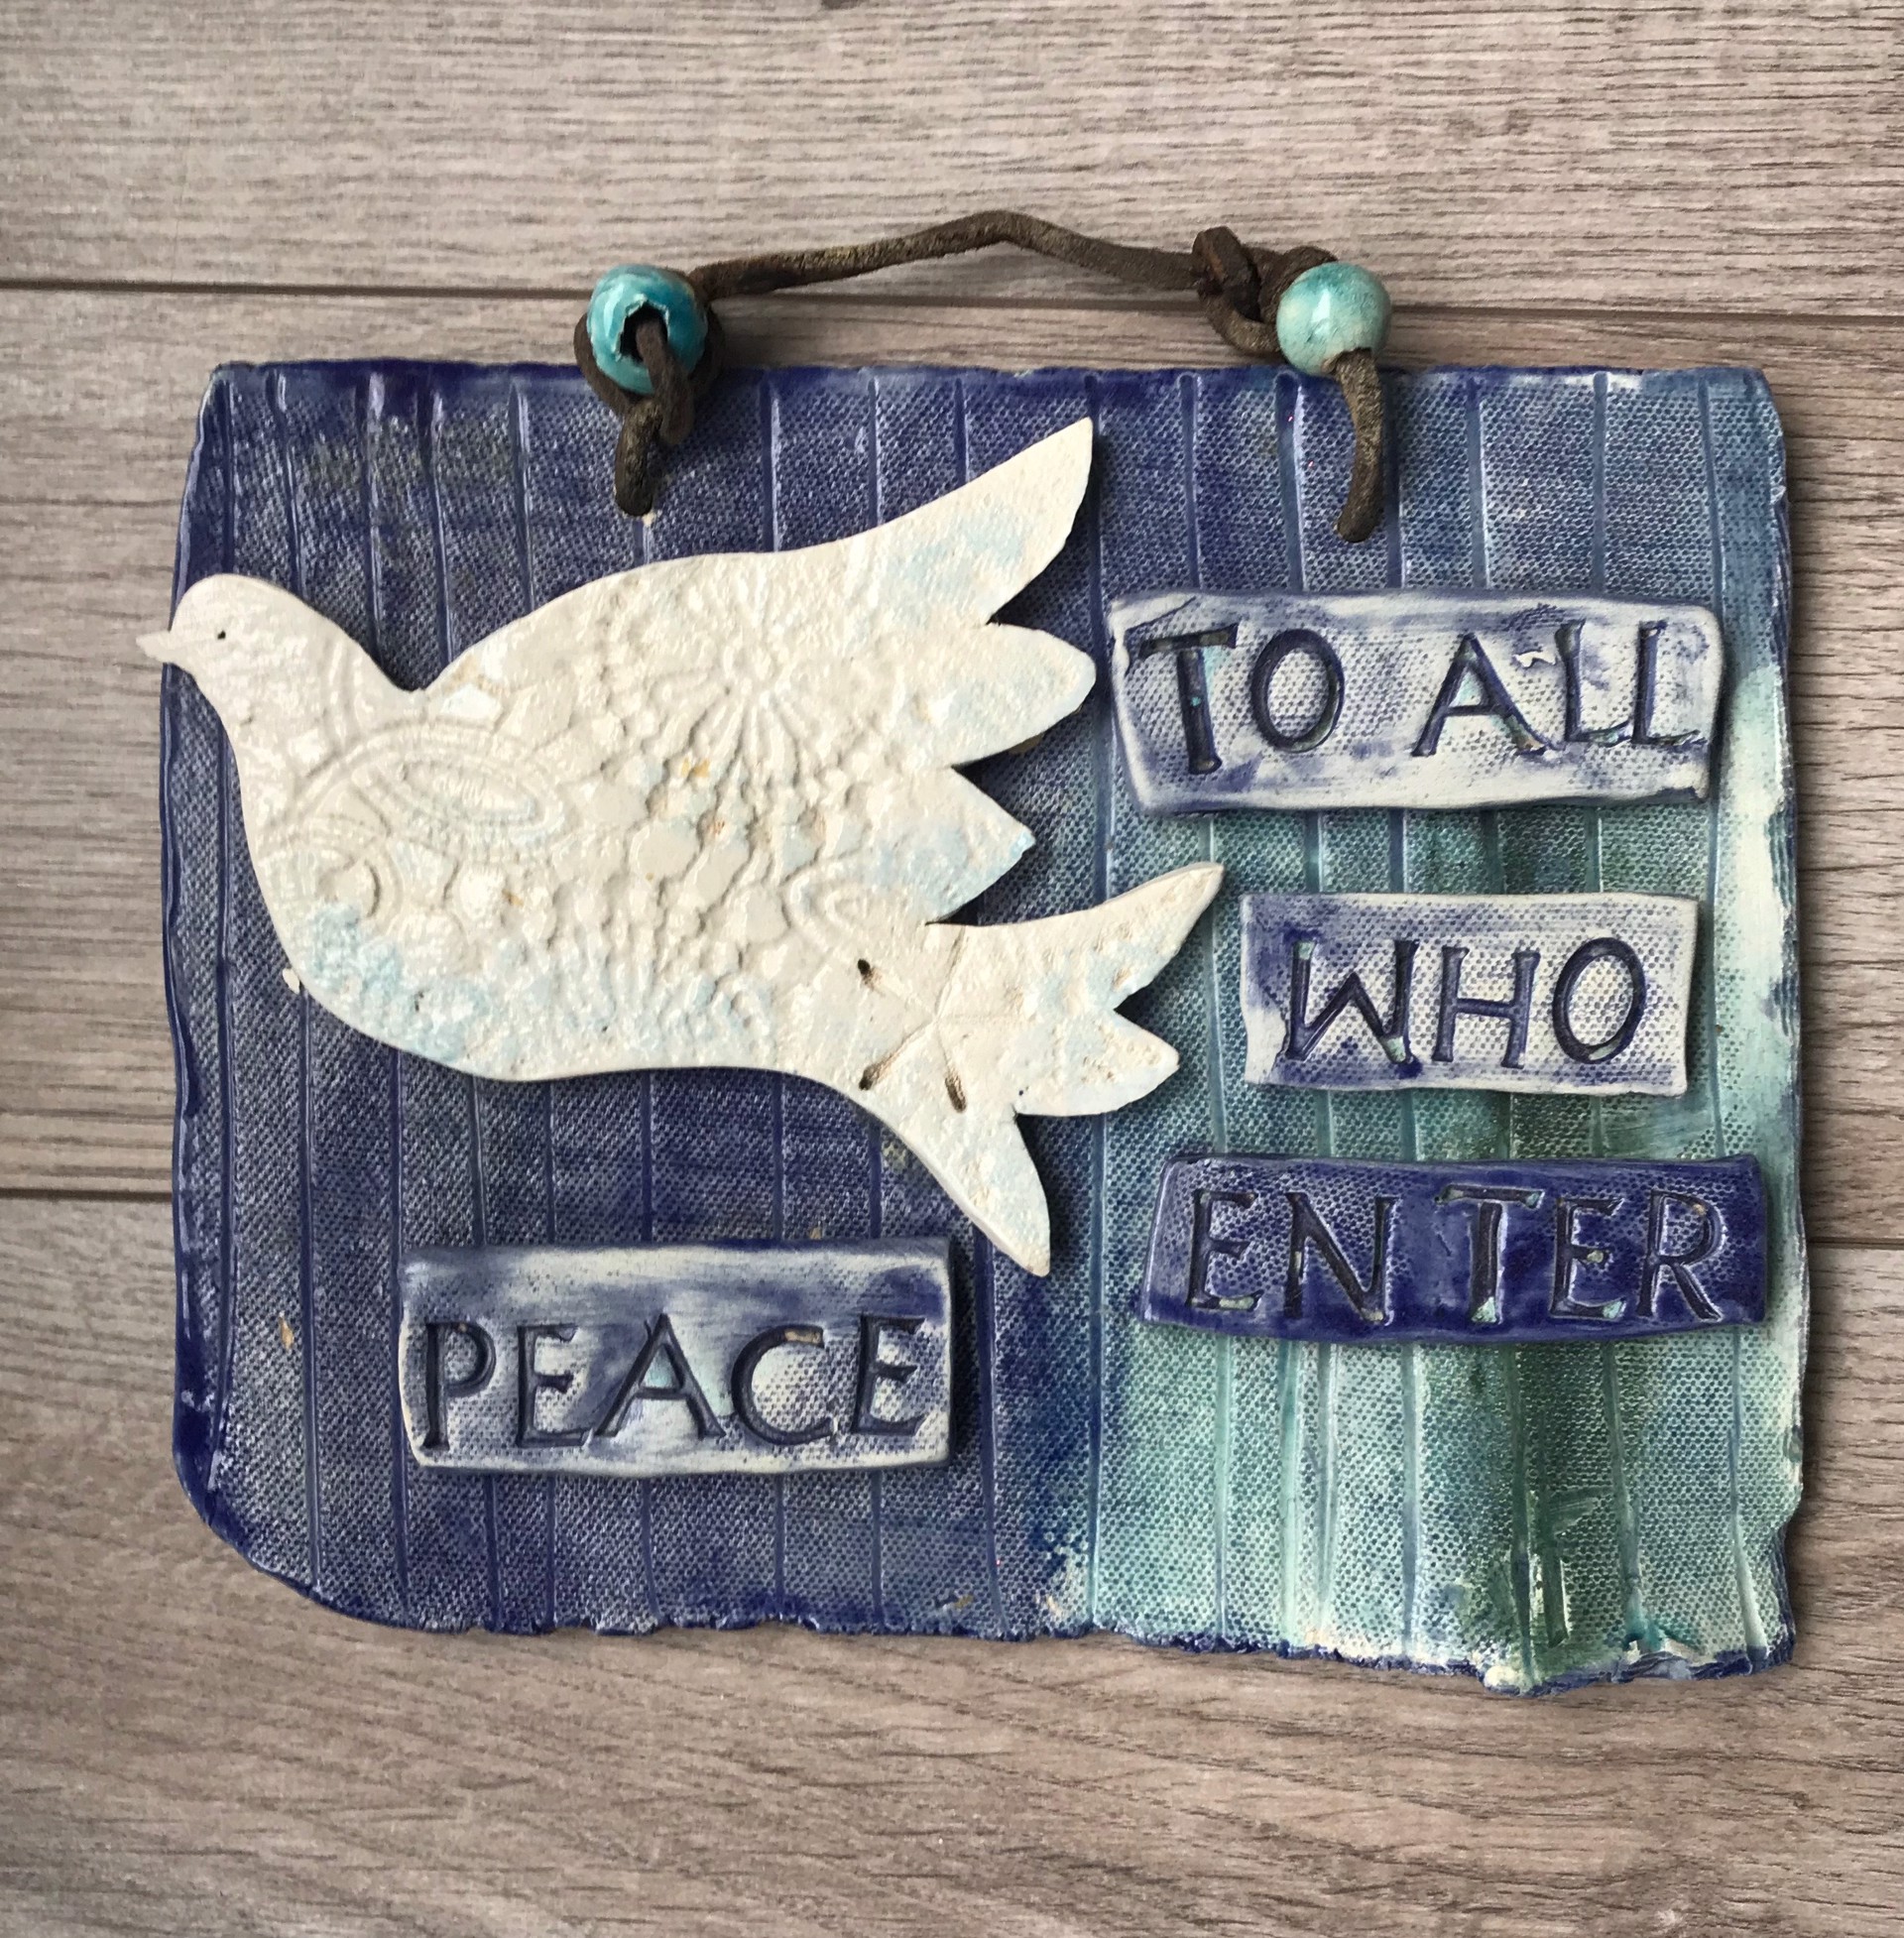 Peace Plaque by Judy Kepley